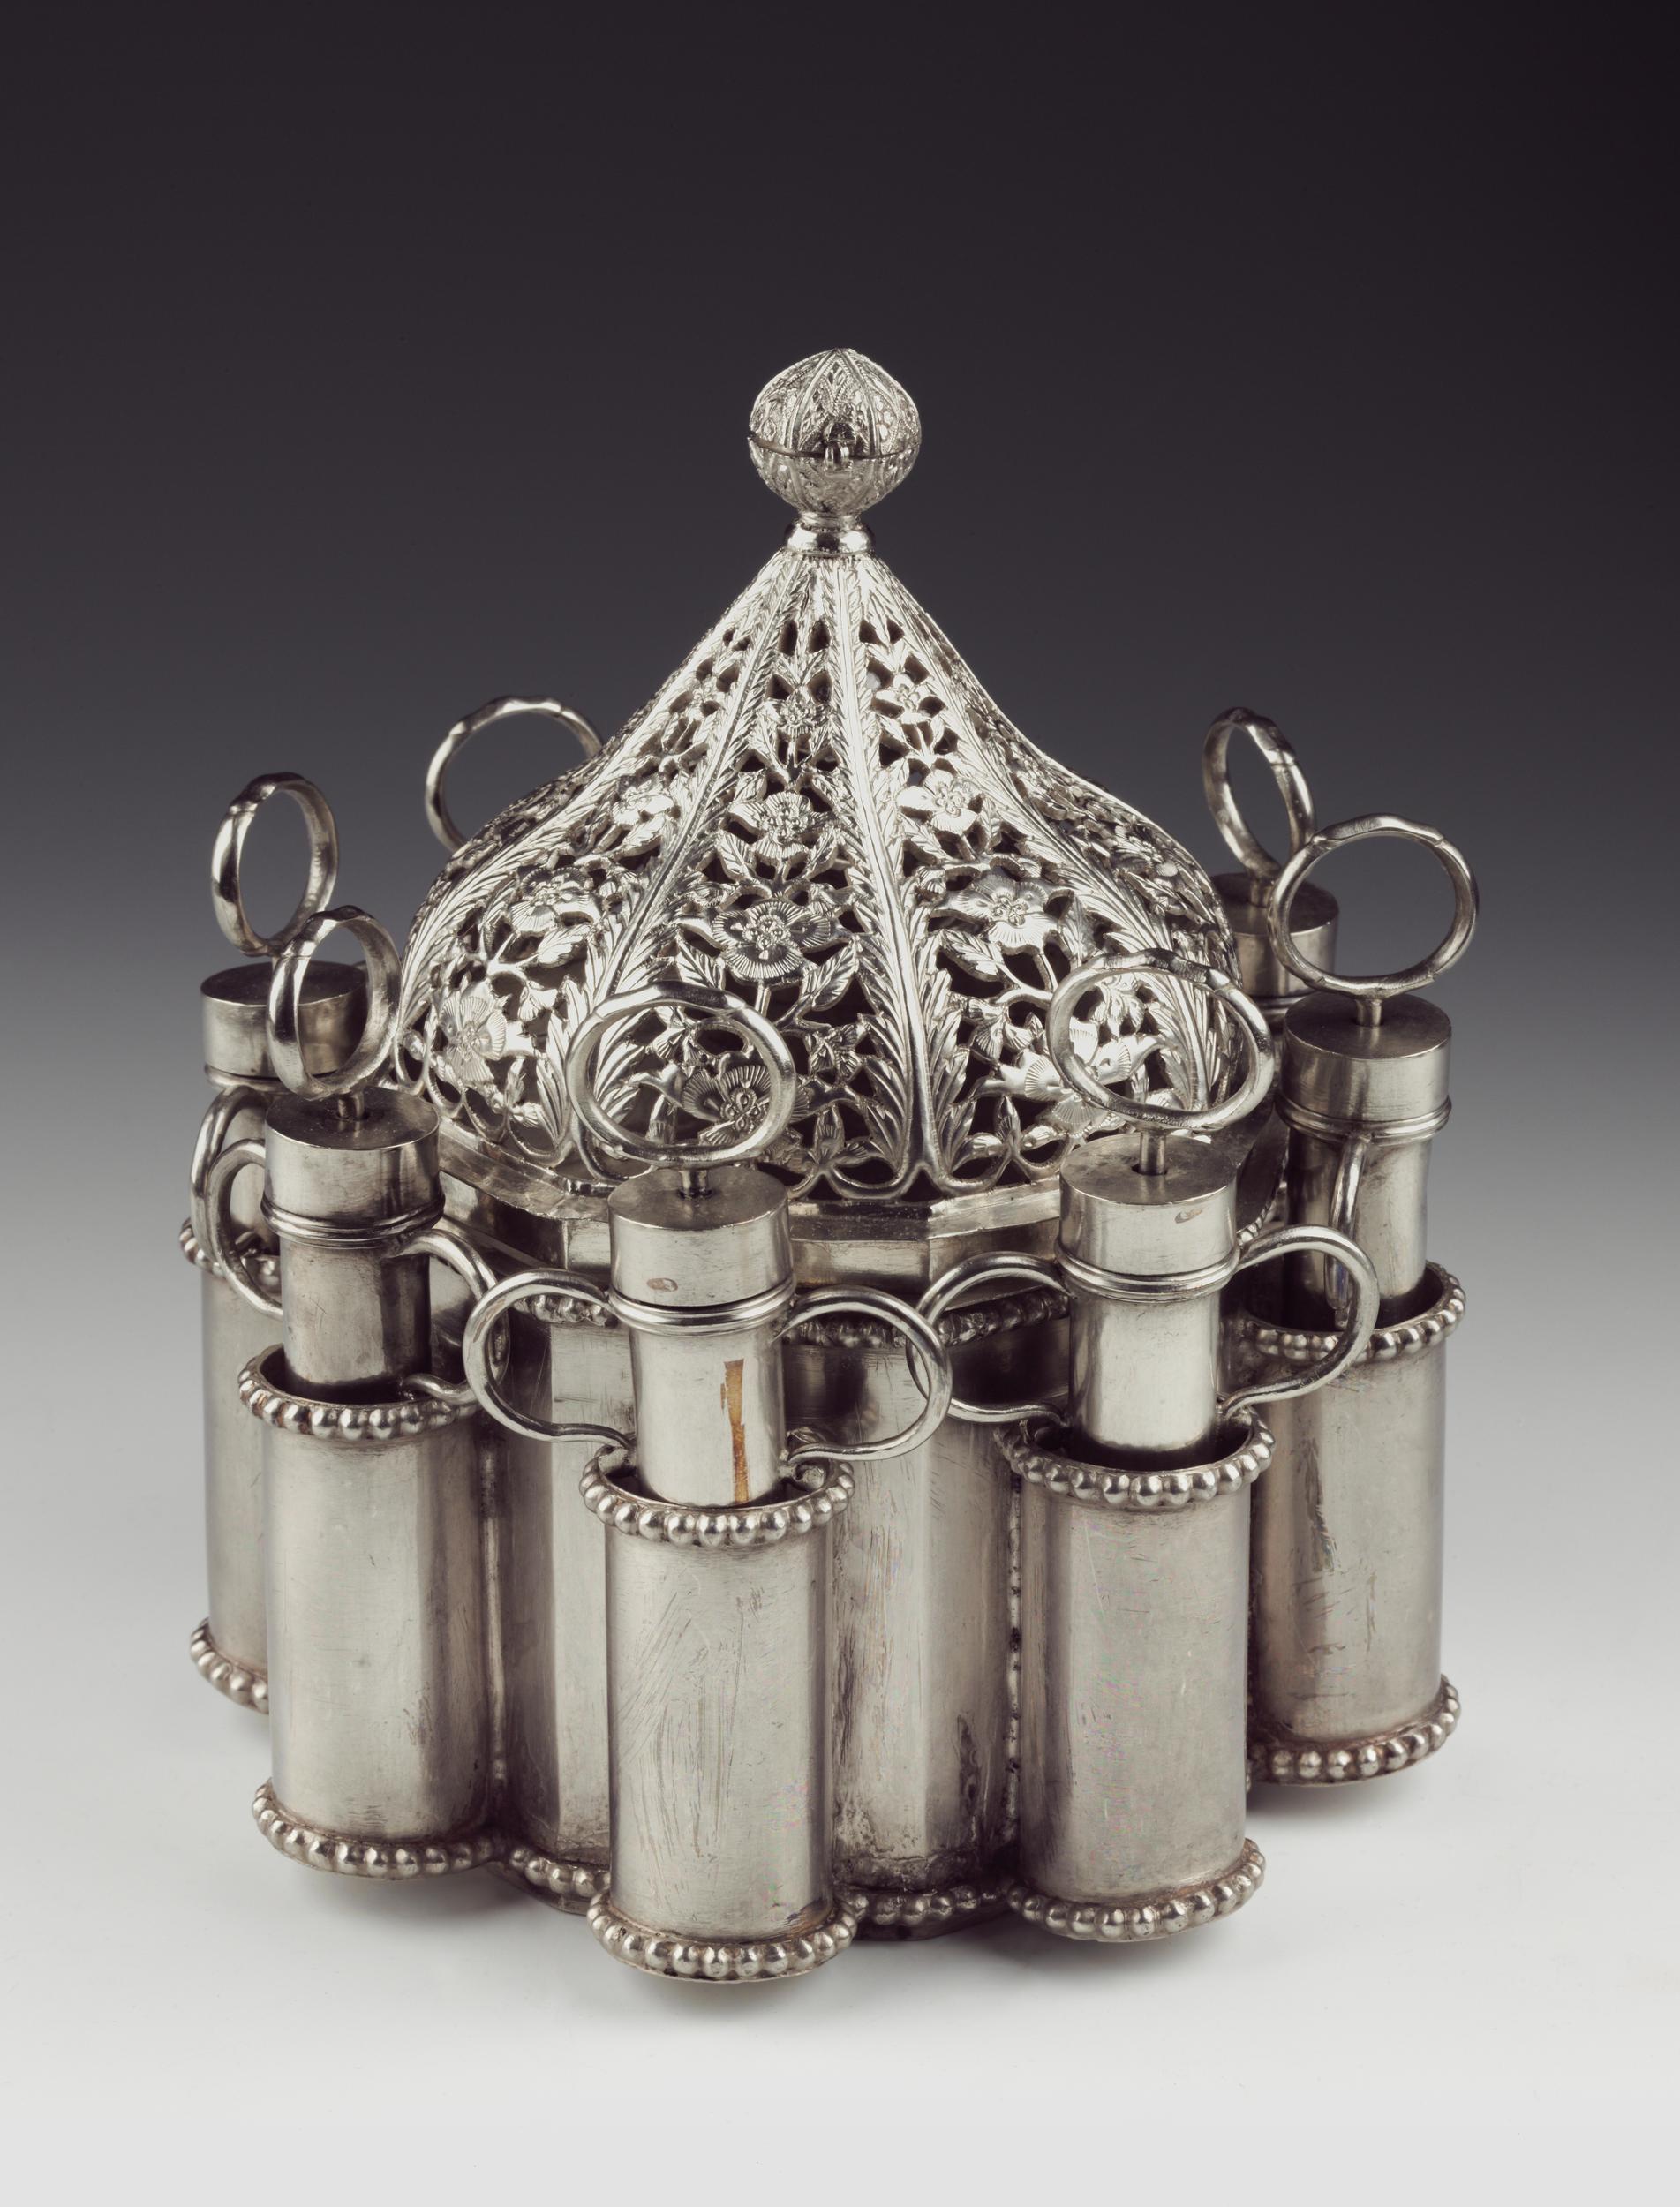 Silver pichkaris / syringes used by royals for holding coloured water in the 19th century. The central part of the object is covered with filigree work. <br>The Rajahs and the Nawabs all exchanged rose water bottles and sprinkled it on each other amid the frenzied drumming of the 'nagaras' (musical instruments). <br><br><hr> In 20-Holi-Pictures: Celebration through the Ages